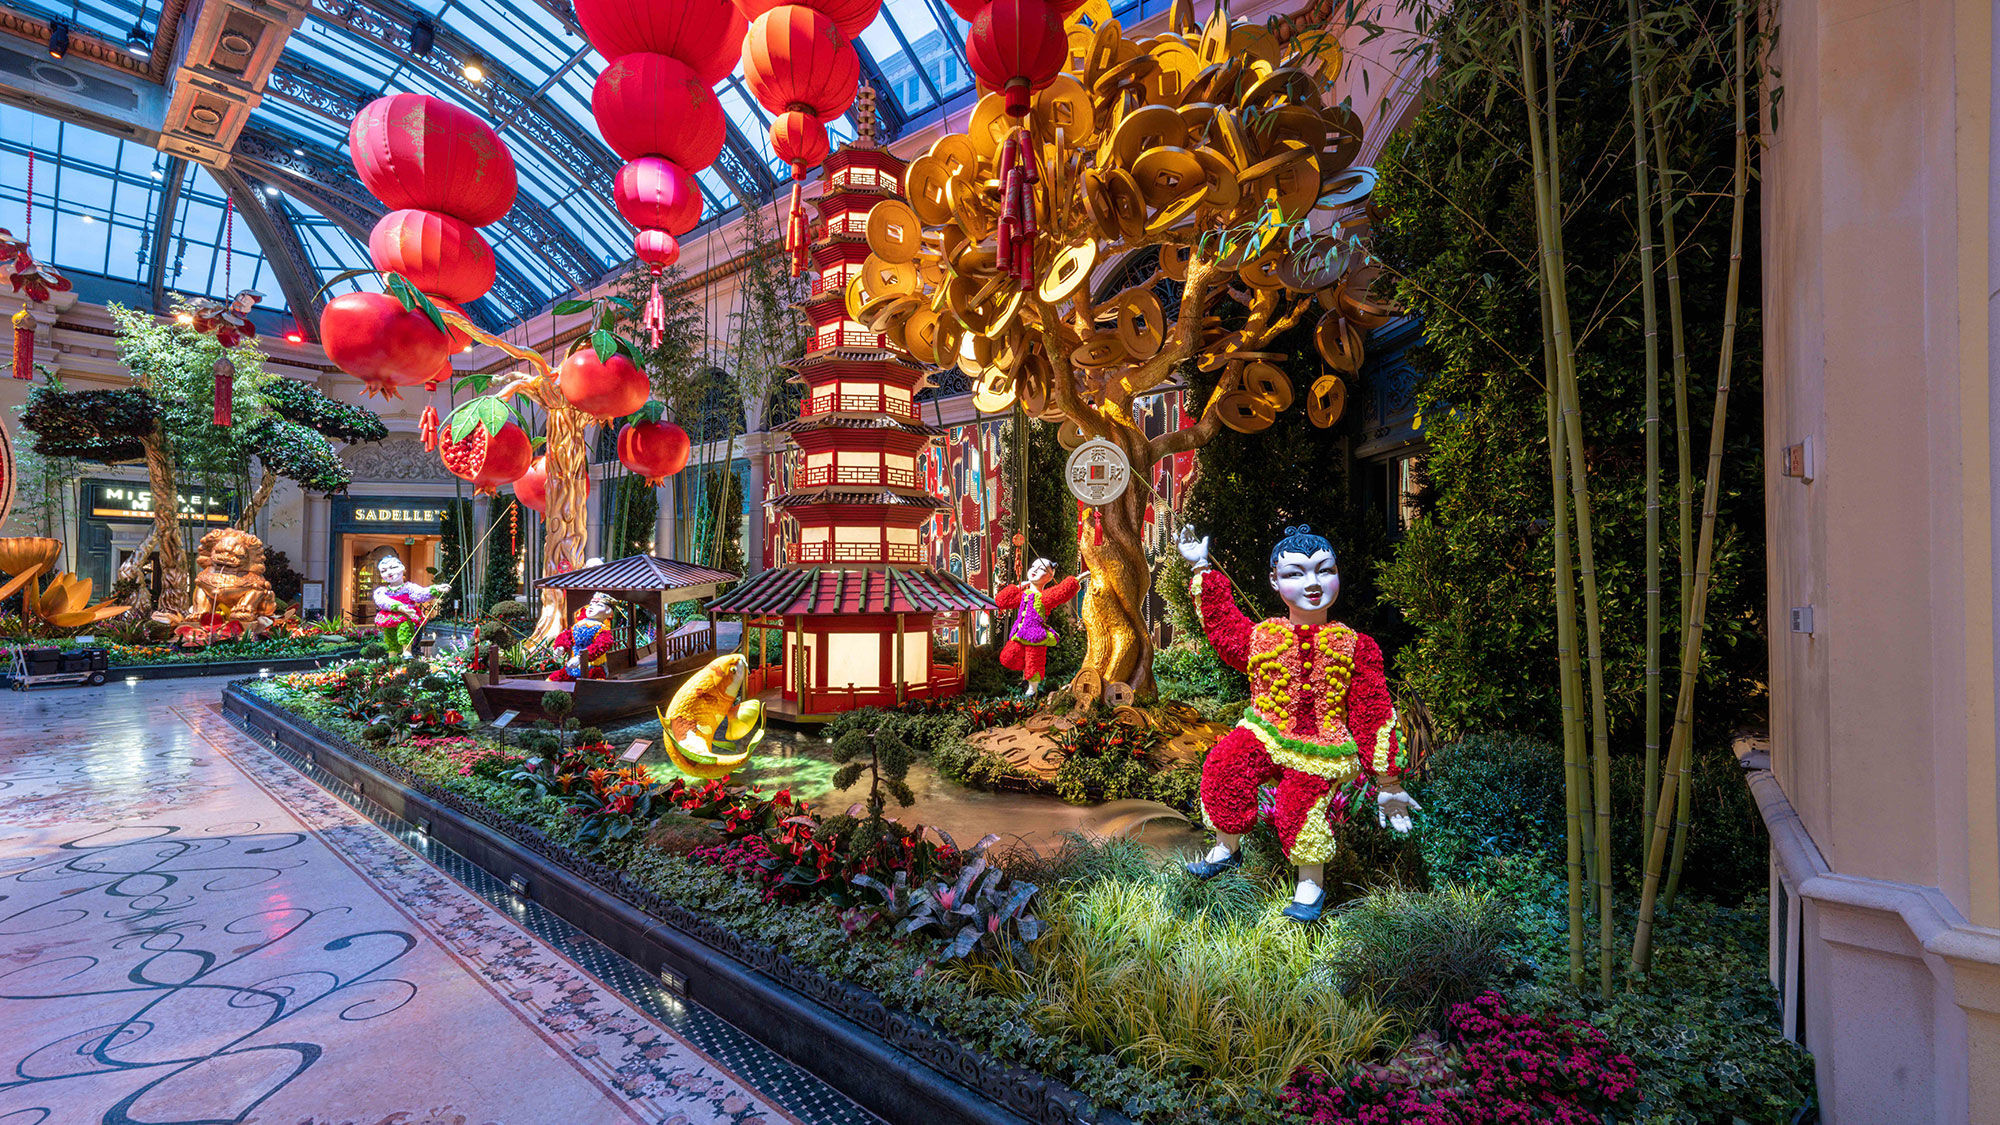 Designer Ed Libby worked with Bellagio's Horticulture team to create what he says is a "beautiful space of tranquility and cultural enlightenment" with more than 6,500 plants.